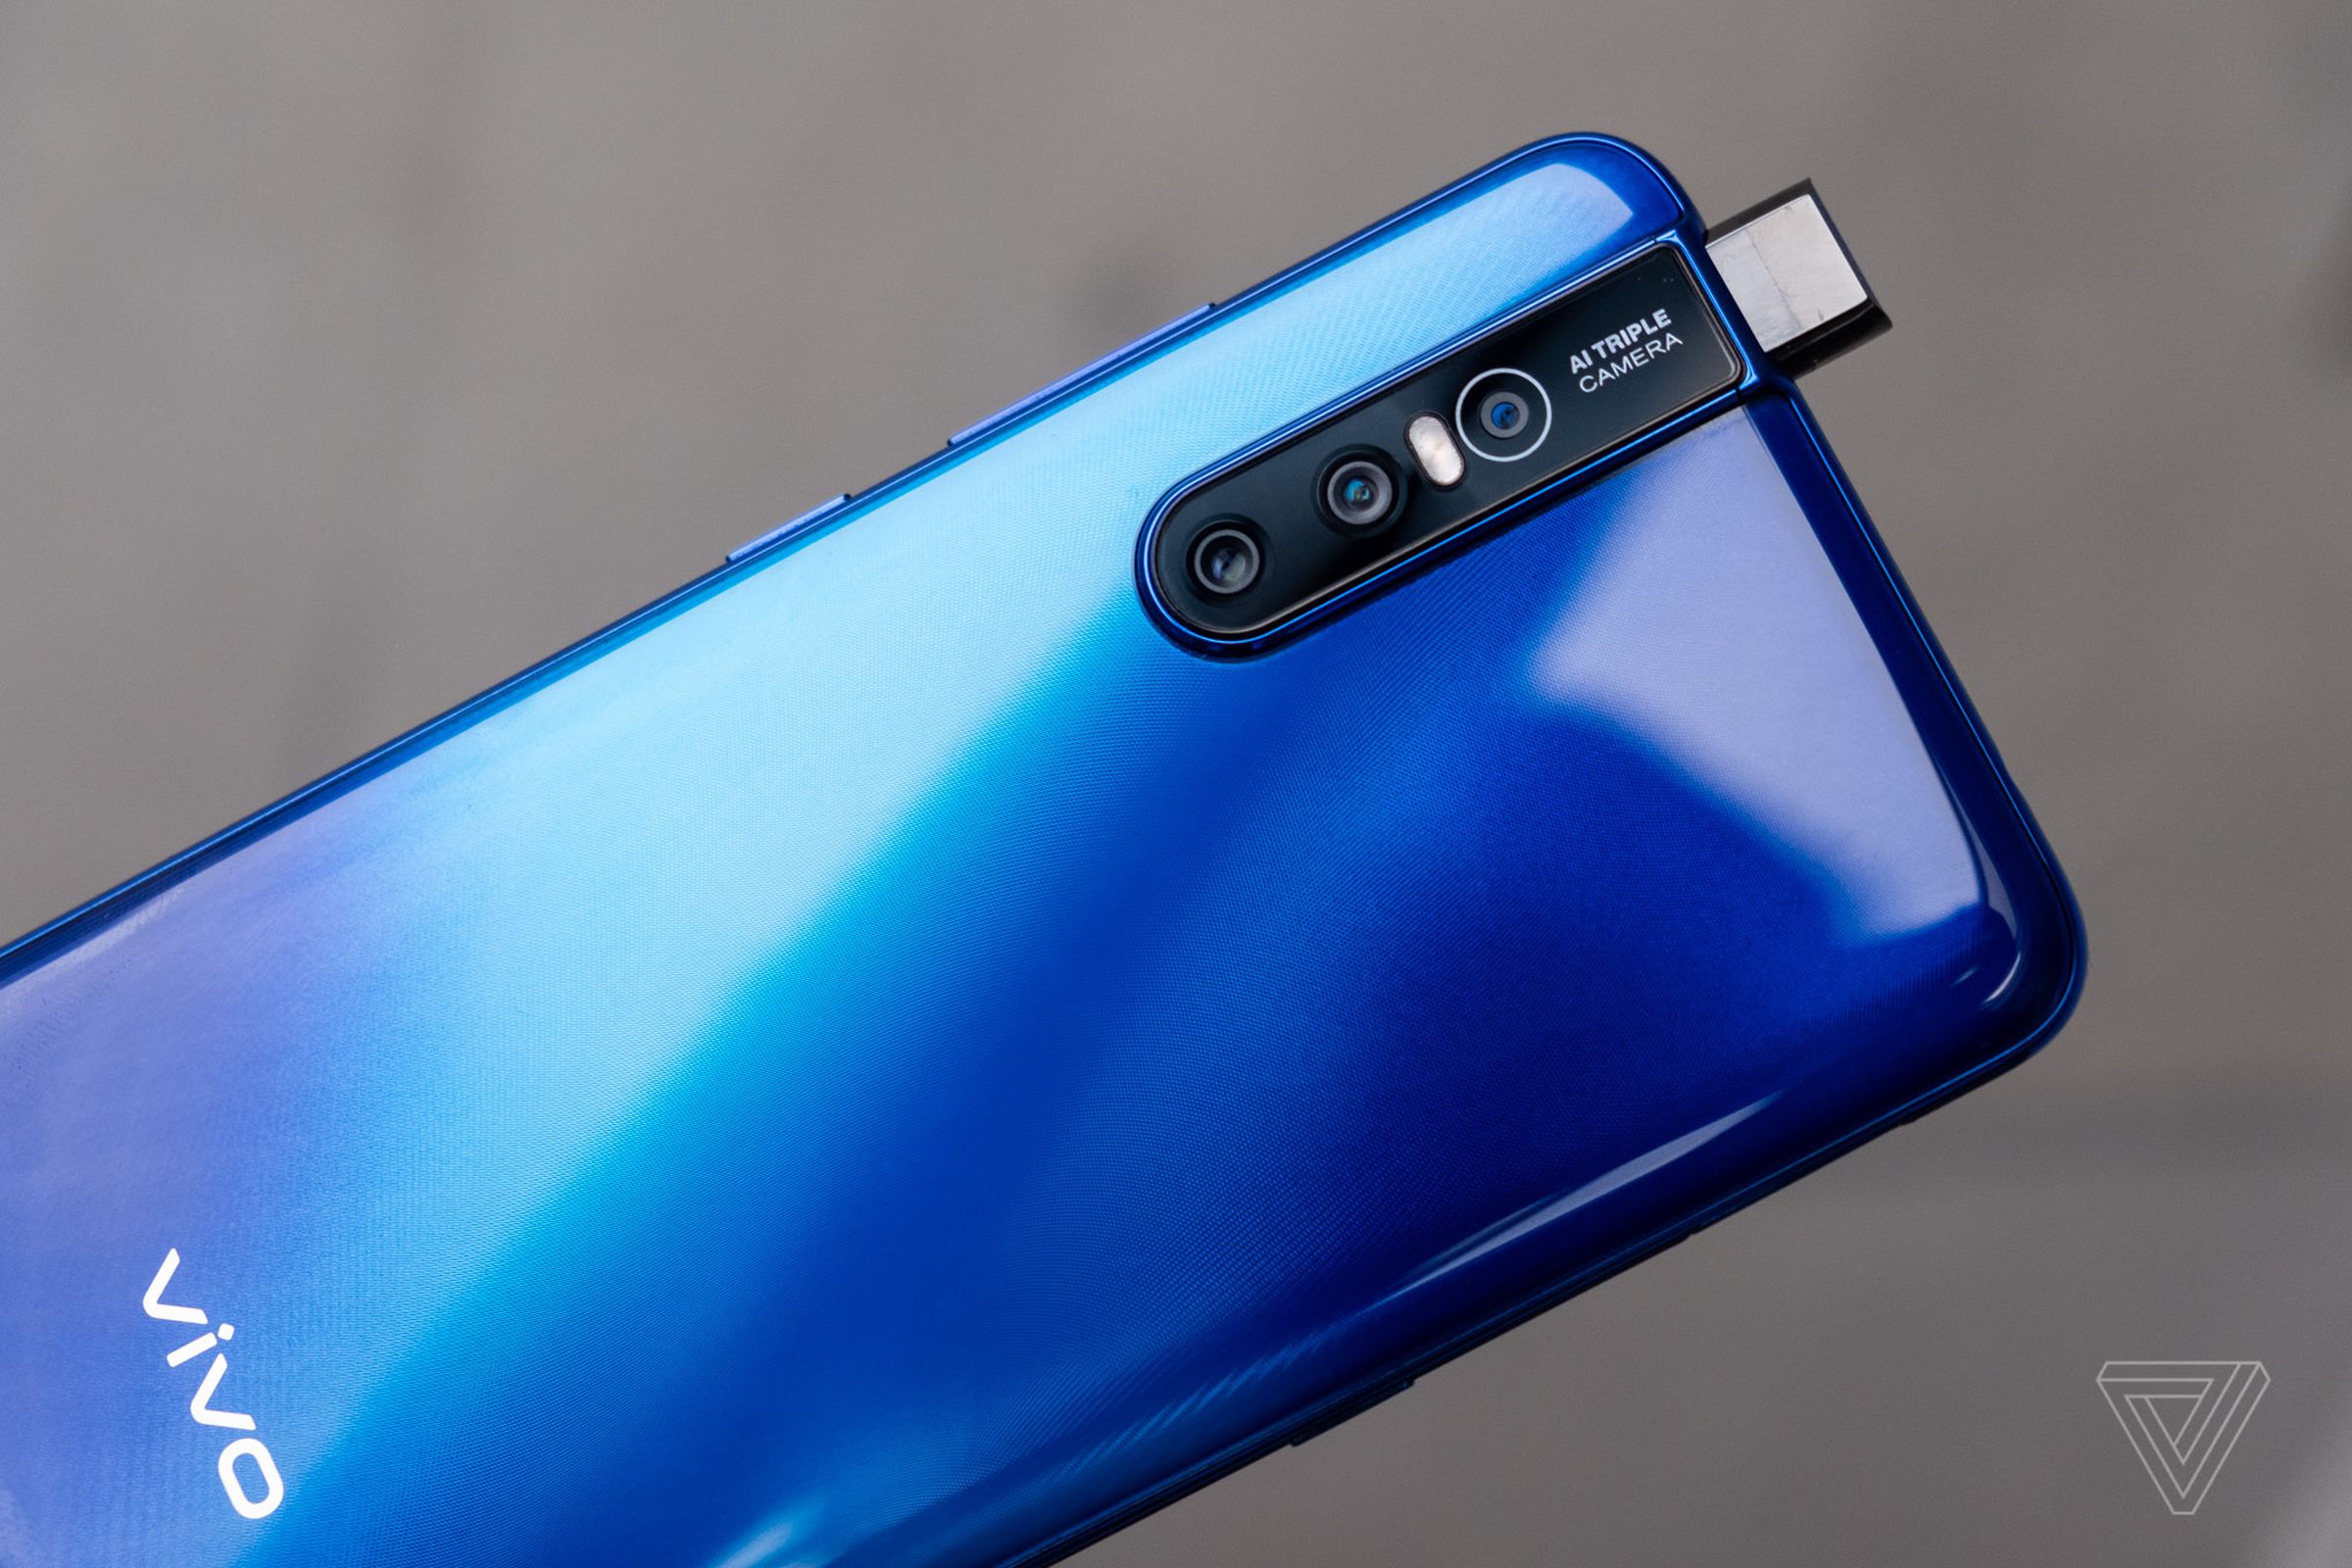 Vivo’s V15 Pro was announced the week before MWC.